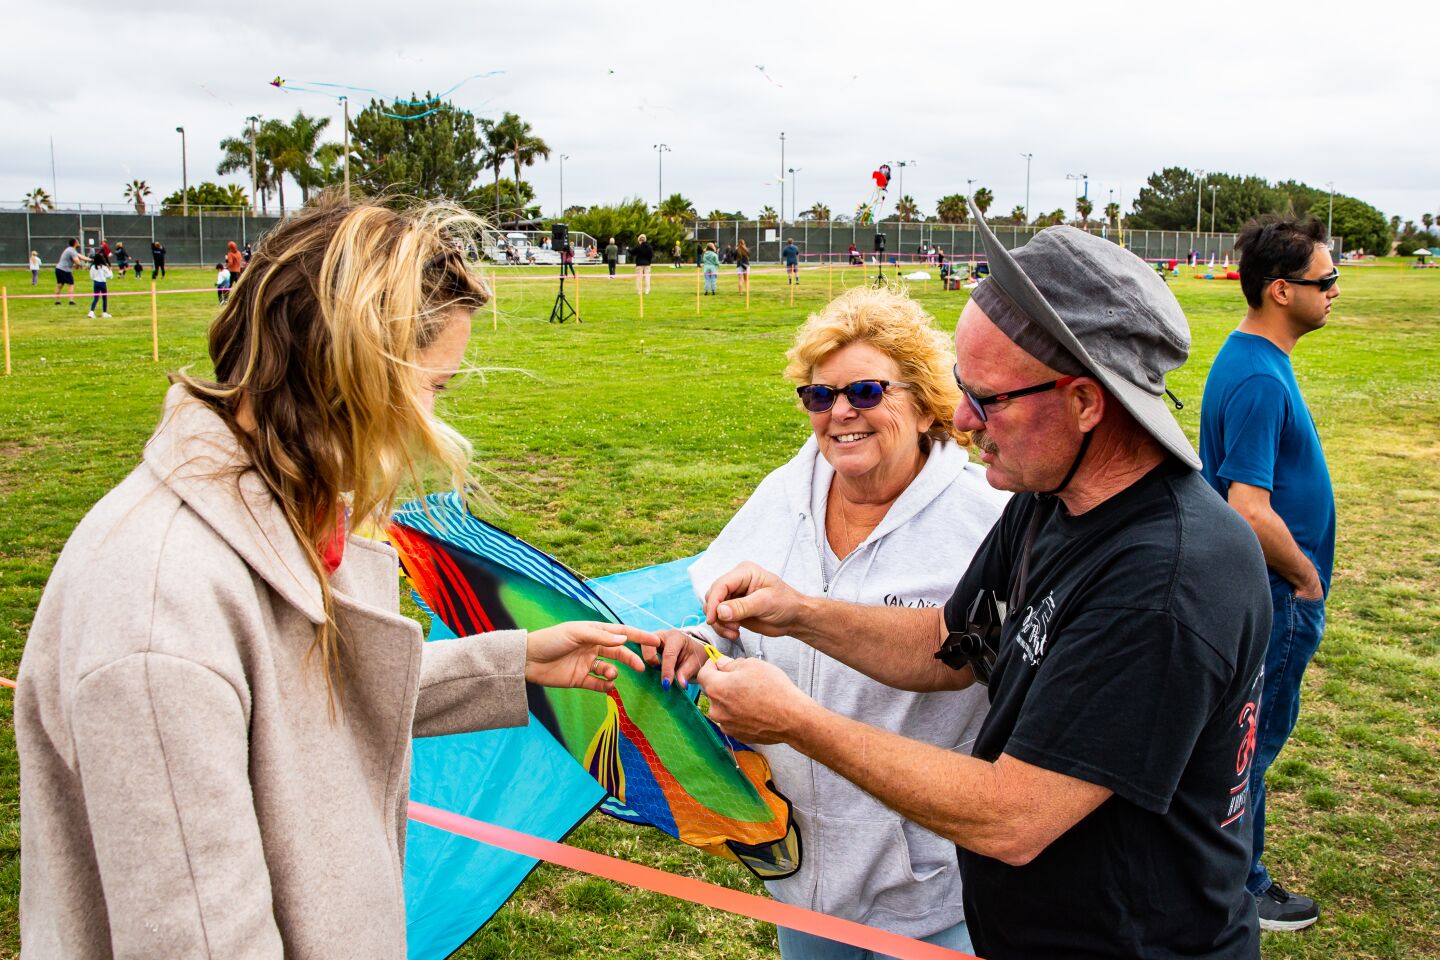 Jenni Rodden (left) gets some help with her fish kite from Laura and Russell Dickison.